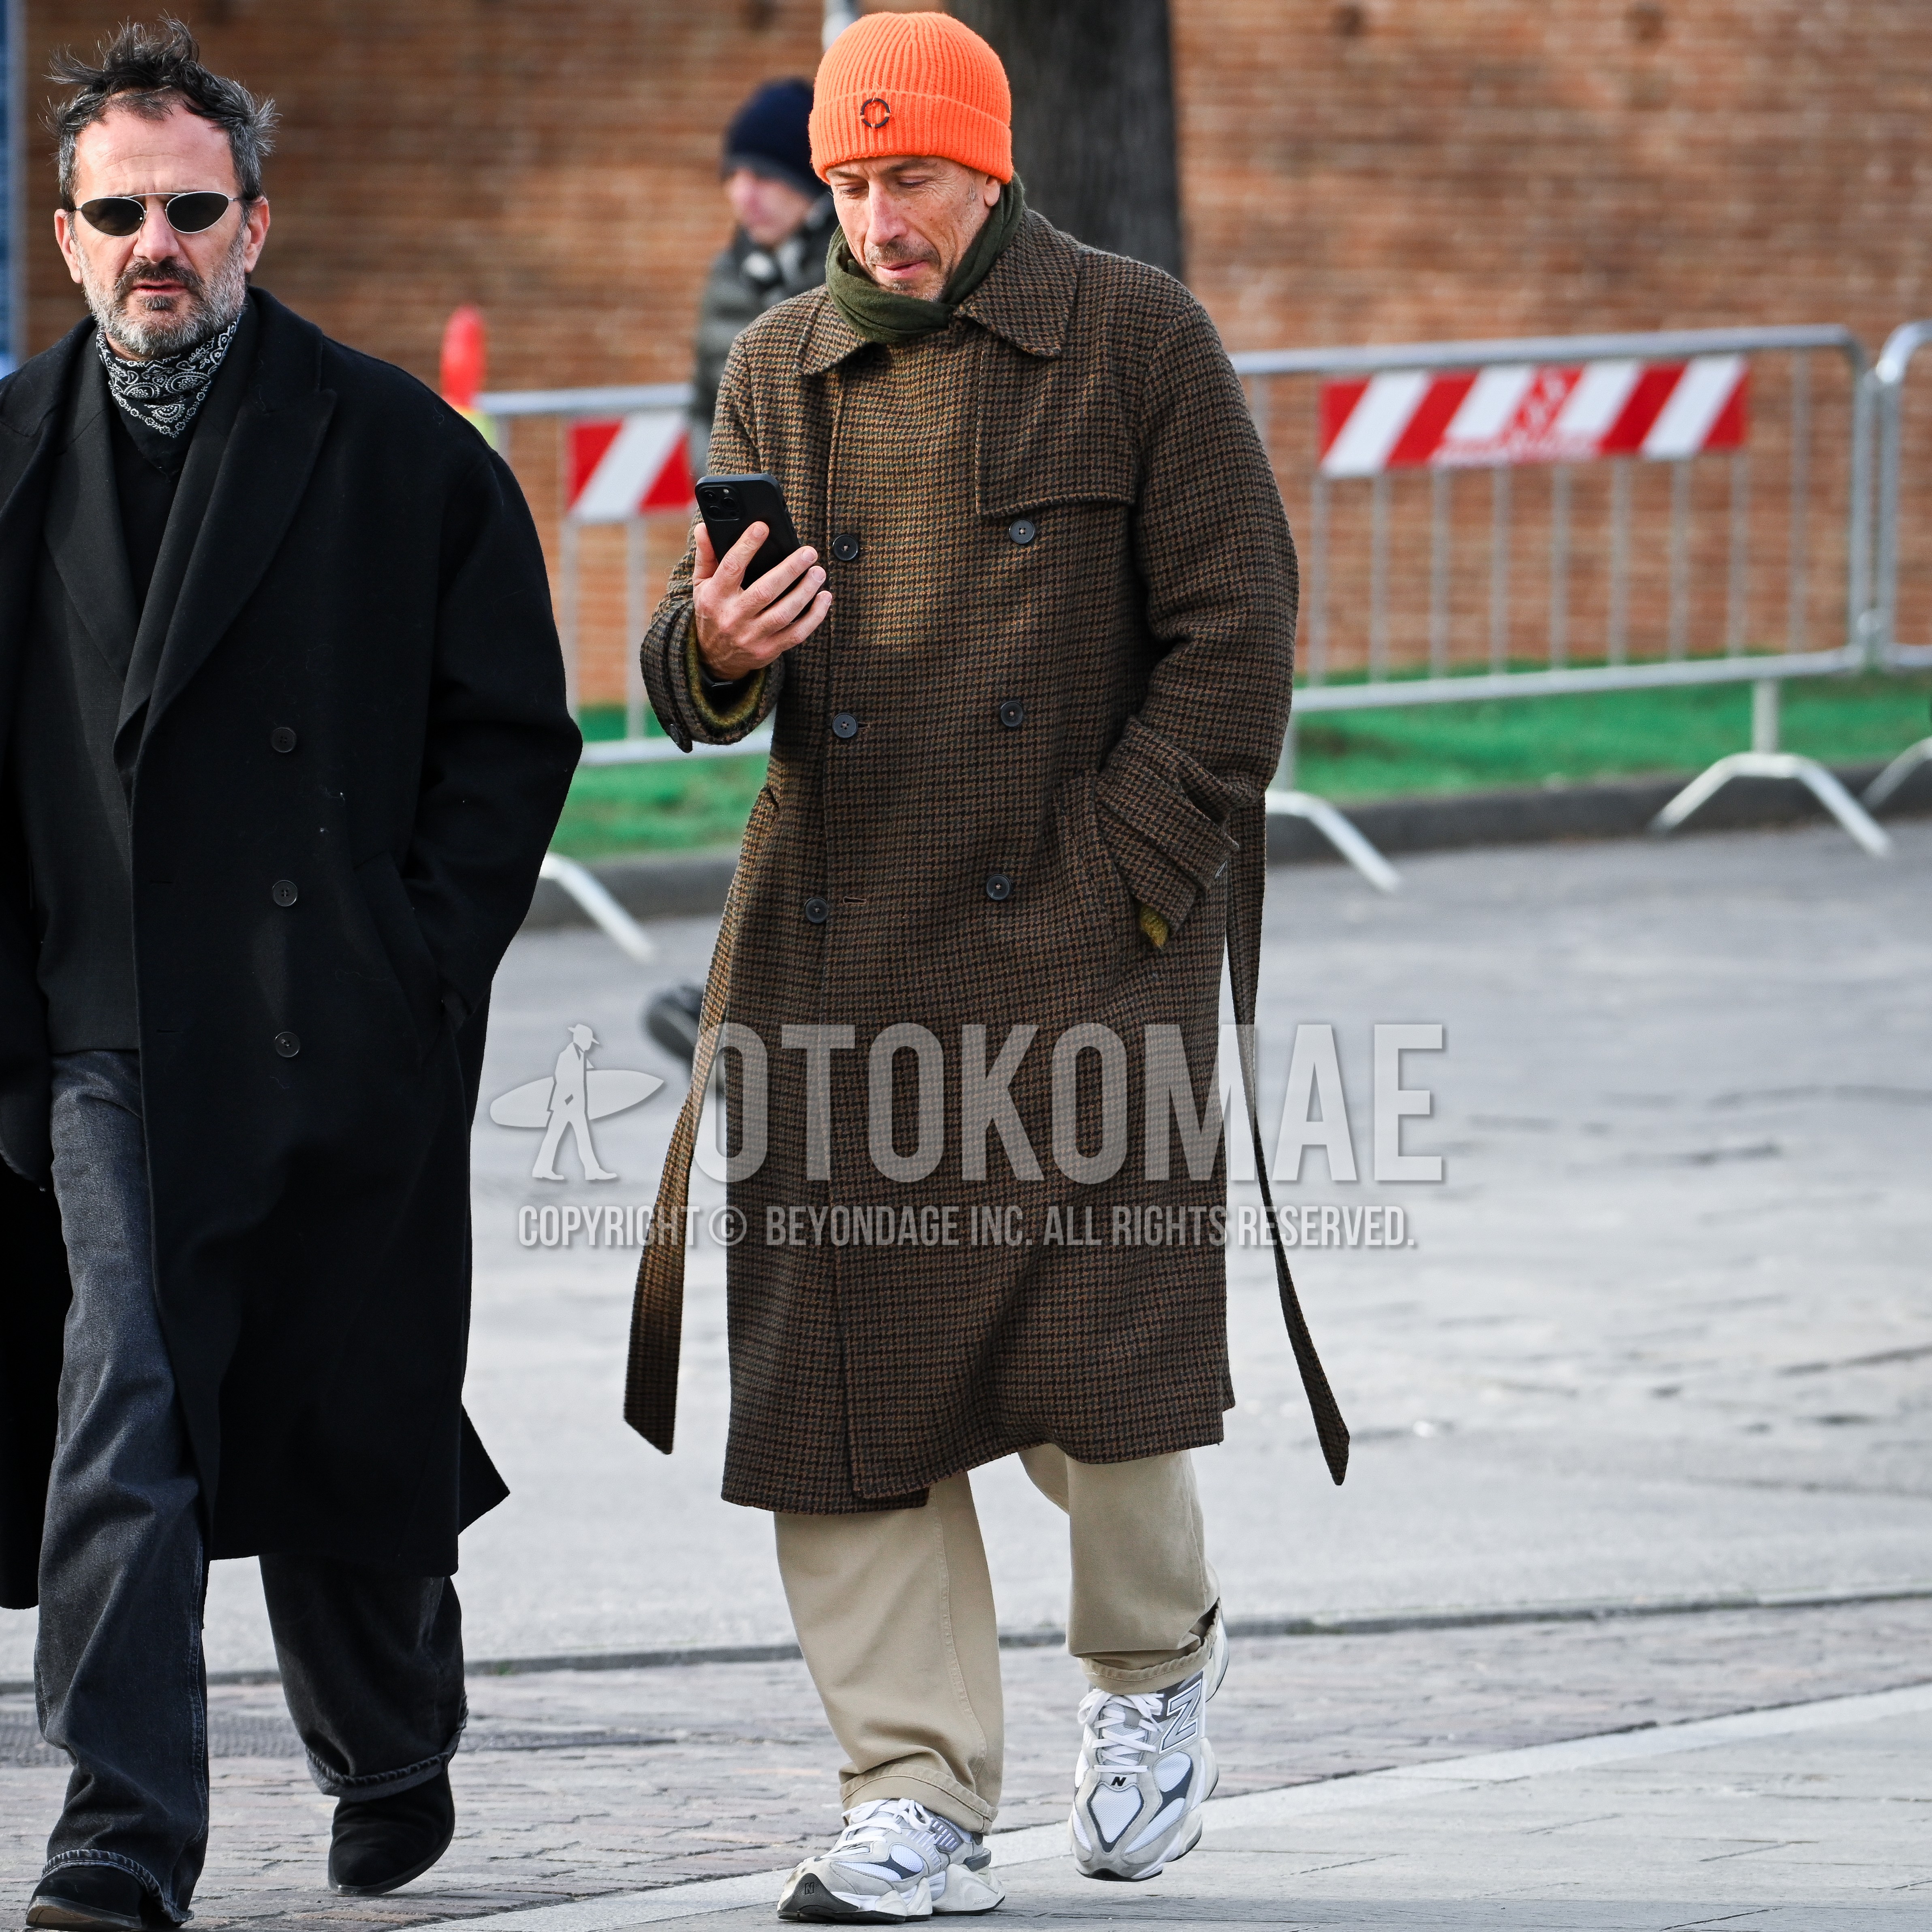 Men's autumn winter outfit with orange one point knit cap, olive green plain scarf, brown check p coat, beige plain chinos, gray low-cut sneakers.